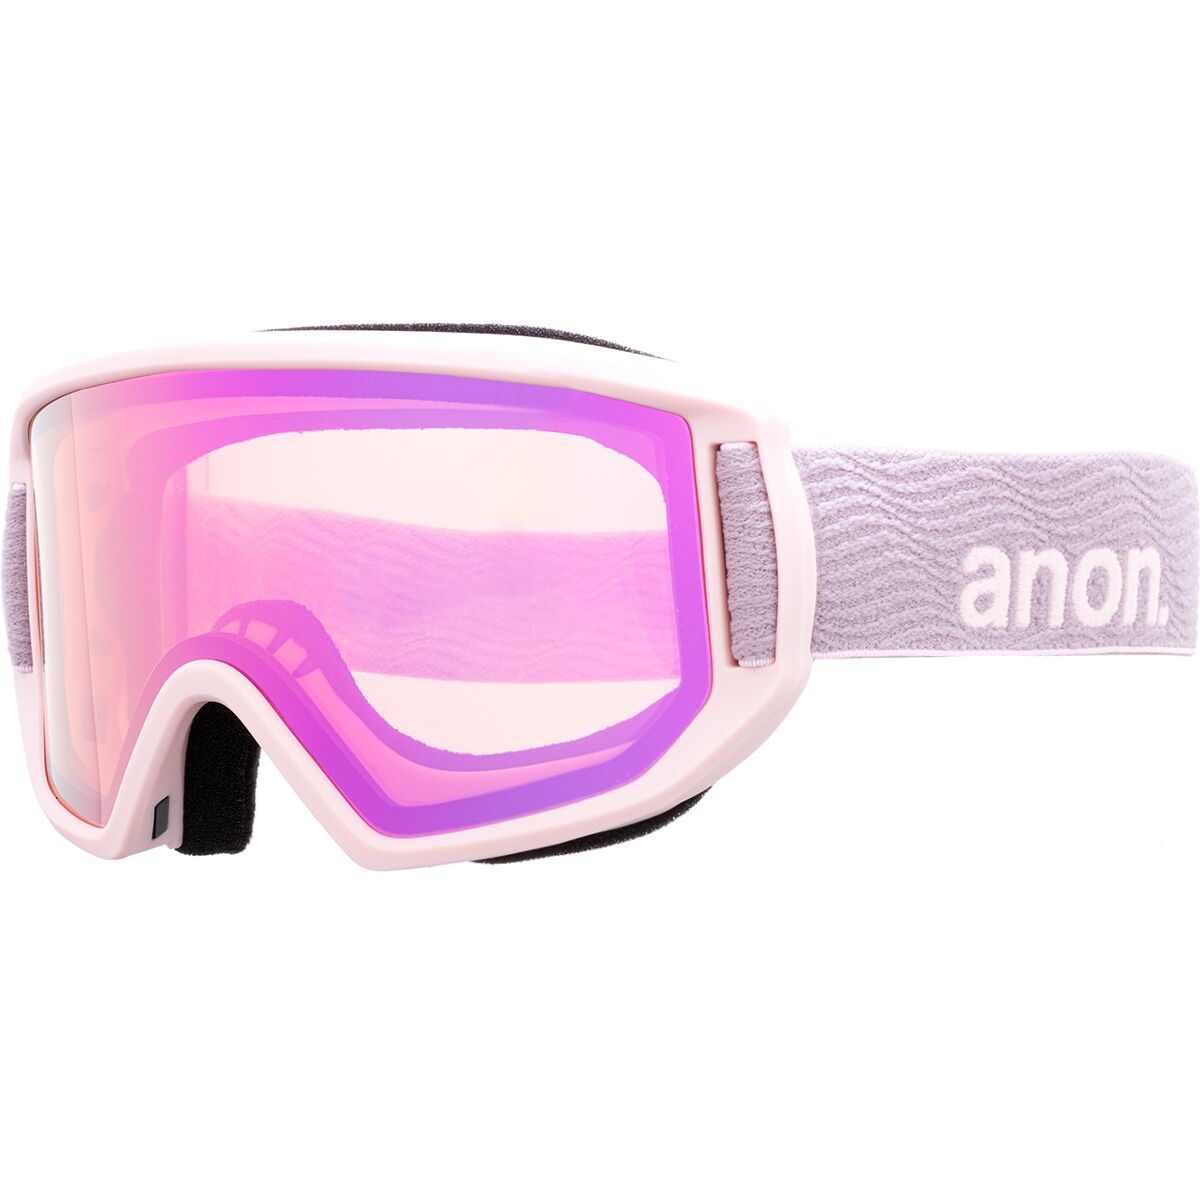 Anon Relapse Jr. Goggles + MFI Face Mask - Kids'